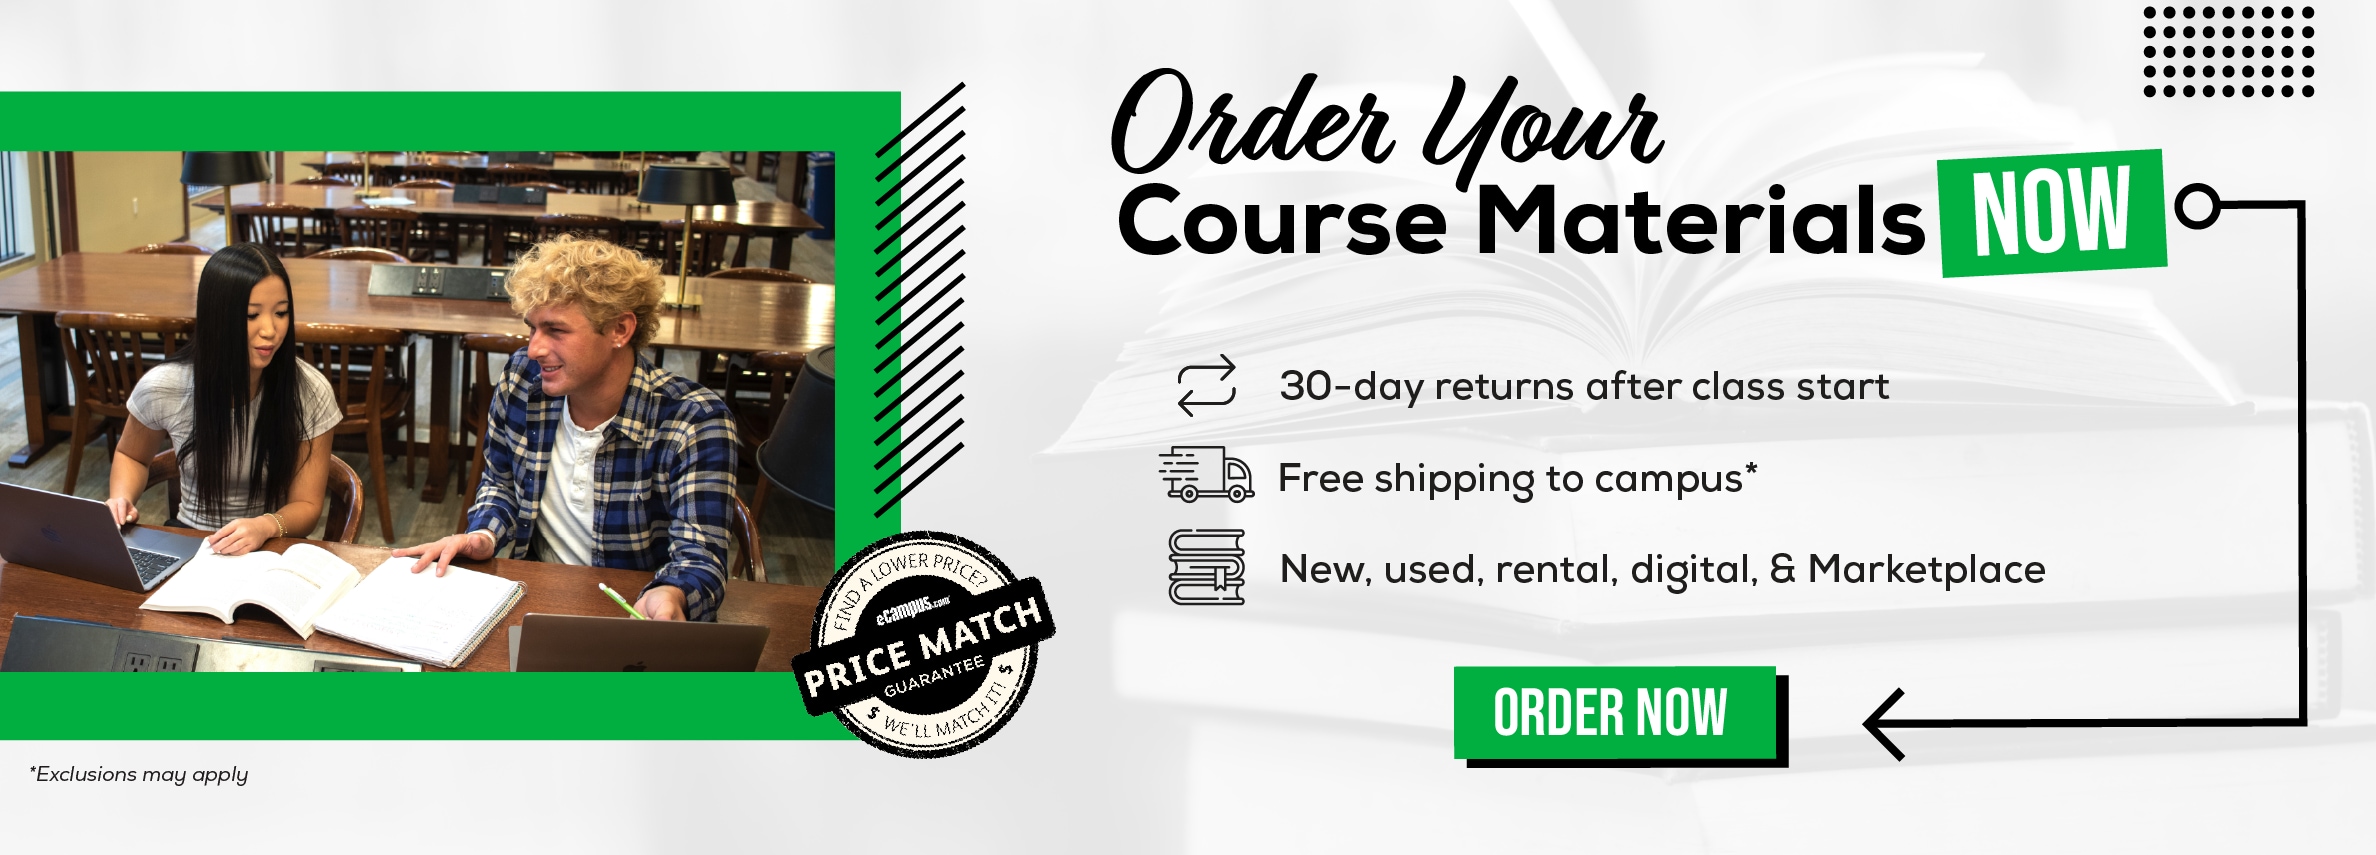 Order Your Course Materials Now. 30-day returns after class start. Free shipping to campus* New, used, rental, digital, & Marketplace. Order now. *Exclusions may apply.